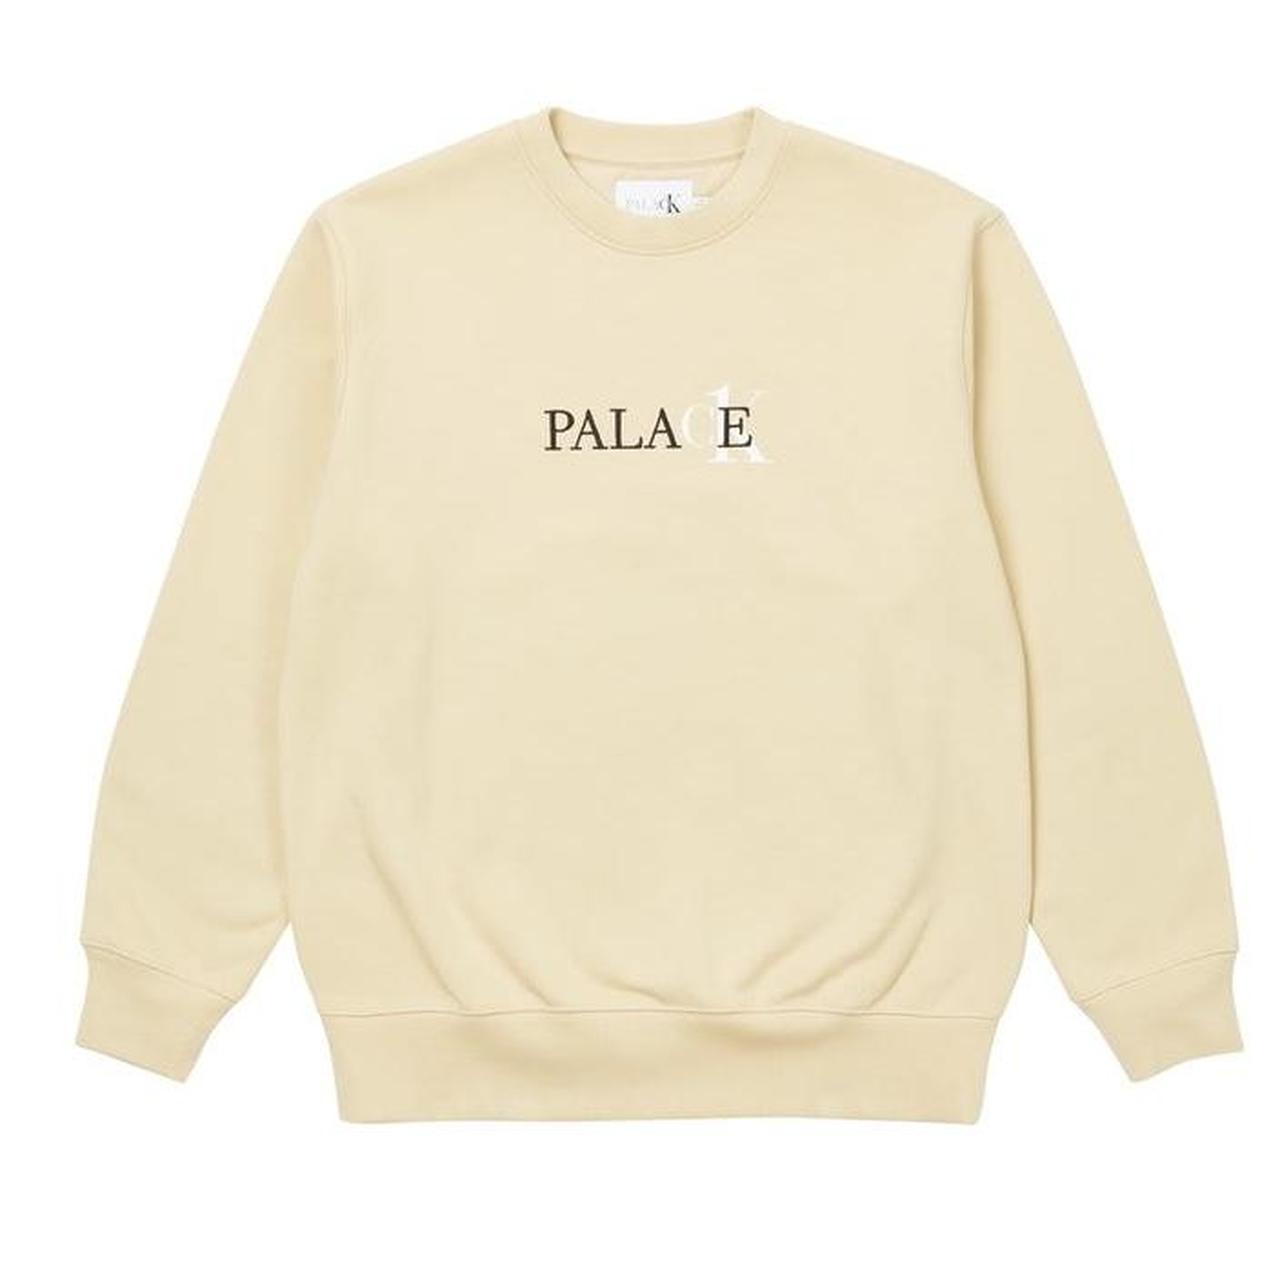 Palace Men's Cream and White Jumper